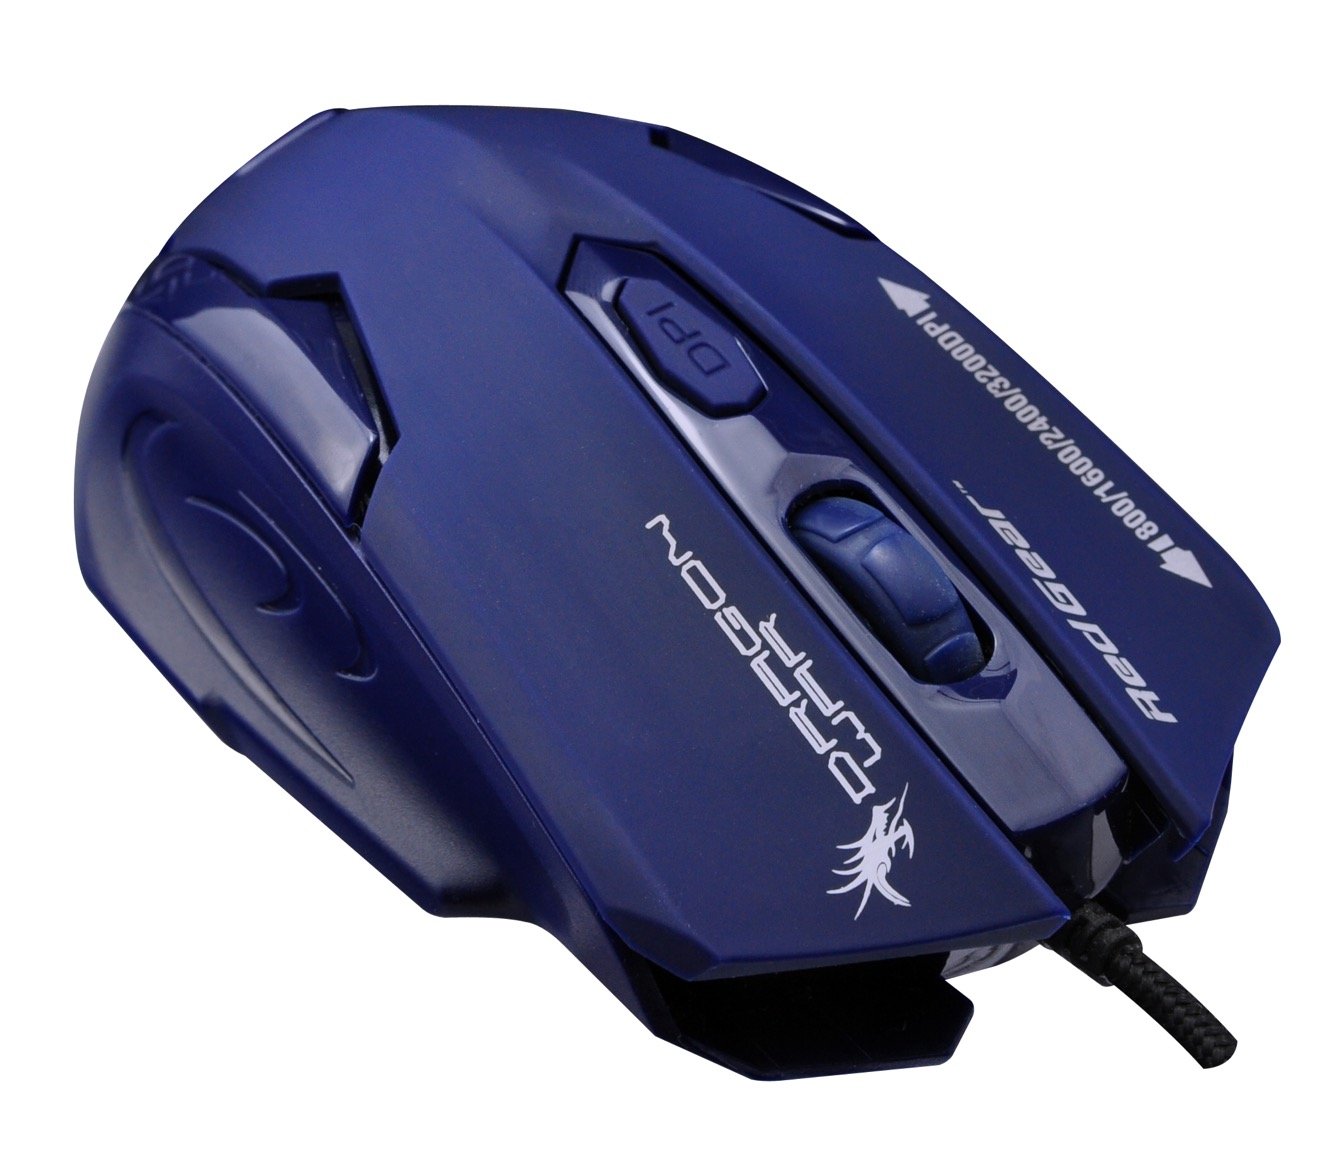 Redgear ELE-G11 Emera USB Wired Gaming Mouse with LED, Upto 3200 DPI